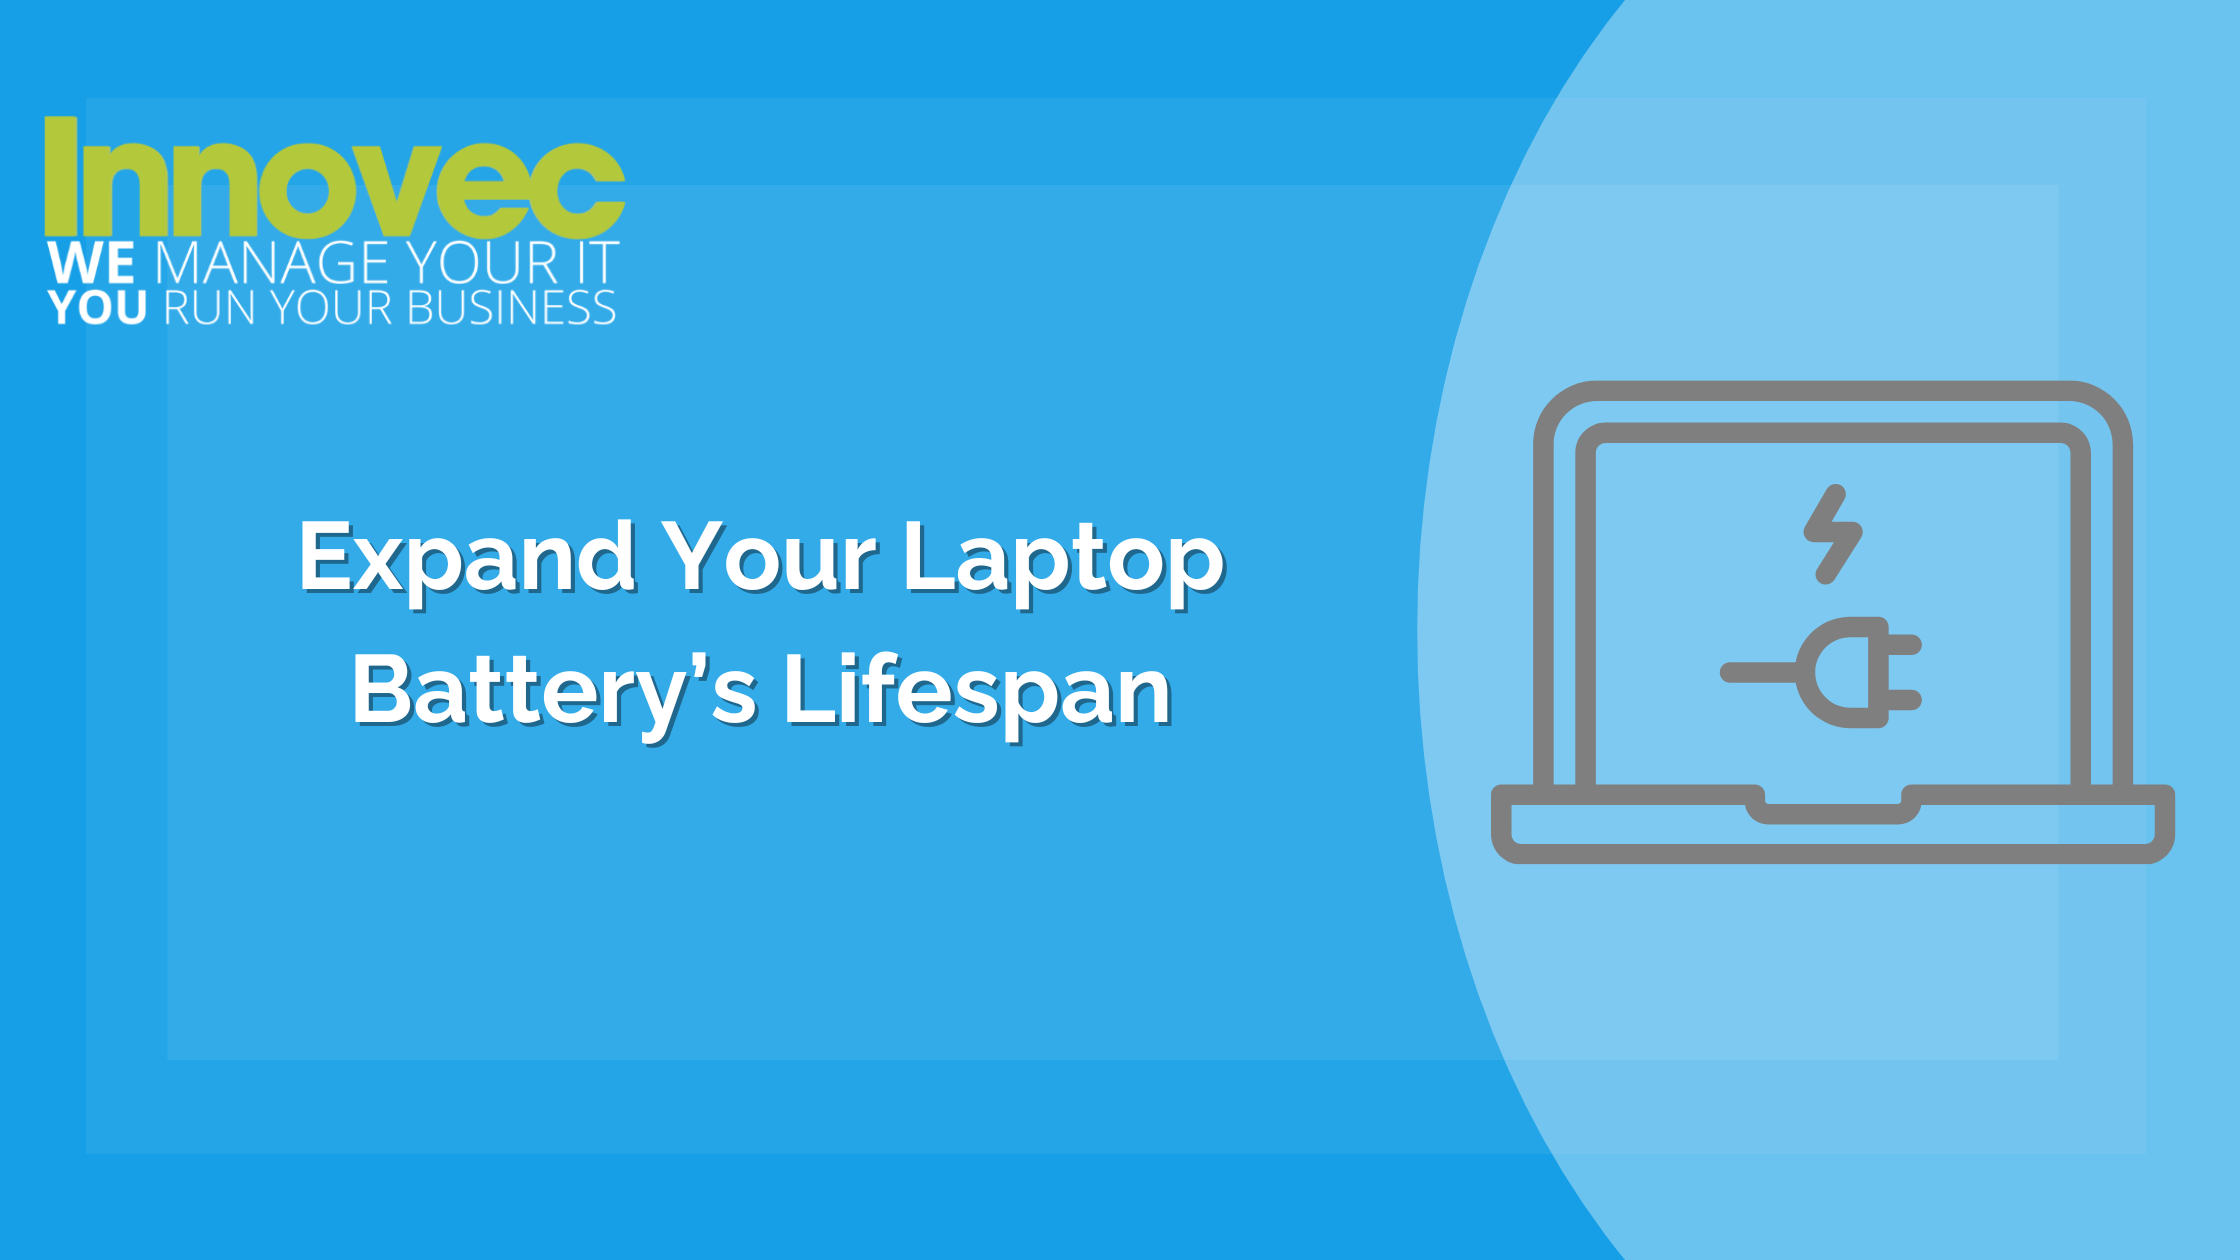 Expand Your Laptop Battery's Lifespan